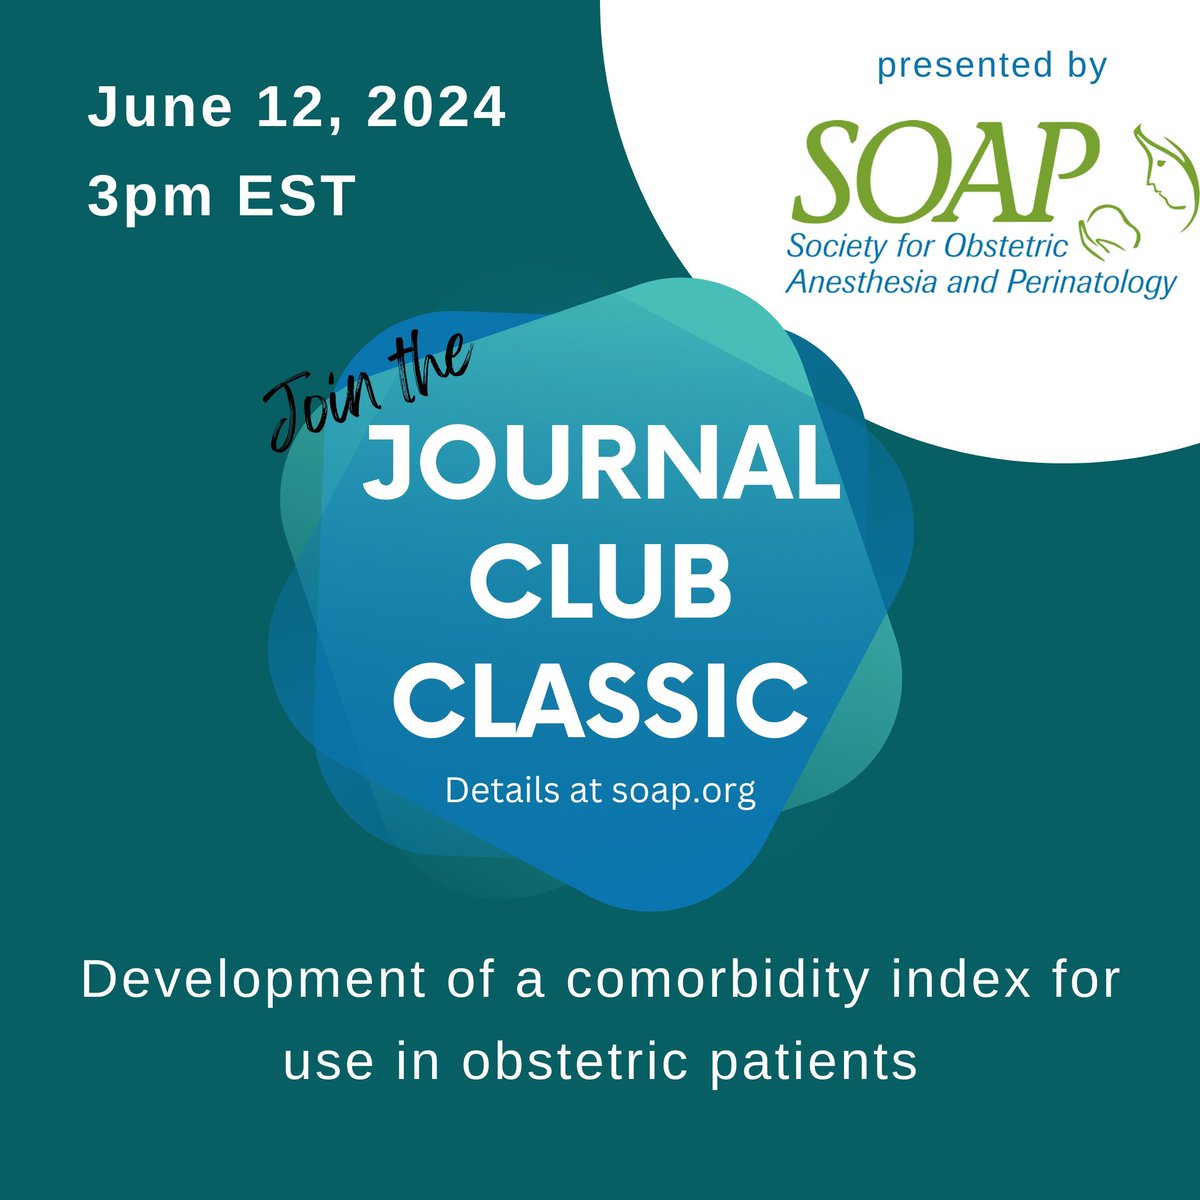 Register for the next SOAP Journal Club Classic, June 12, 3PM EST, hosted by Dr. Vesela Kovacheva featuring Dr. Brian Bateman: Development of a Comorbidity Index for Use in Obstetric Patients. To register: buff.ly/49PfDS4 #SOAP #OBAnes